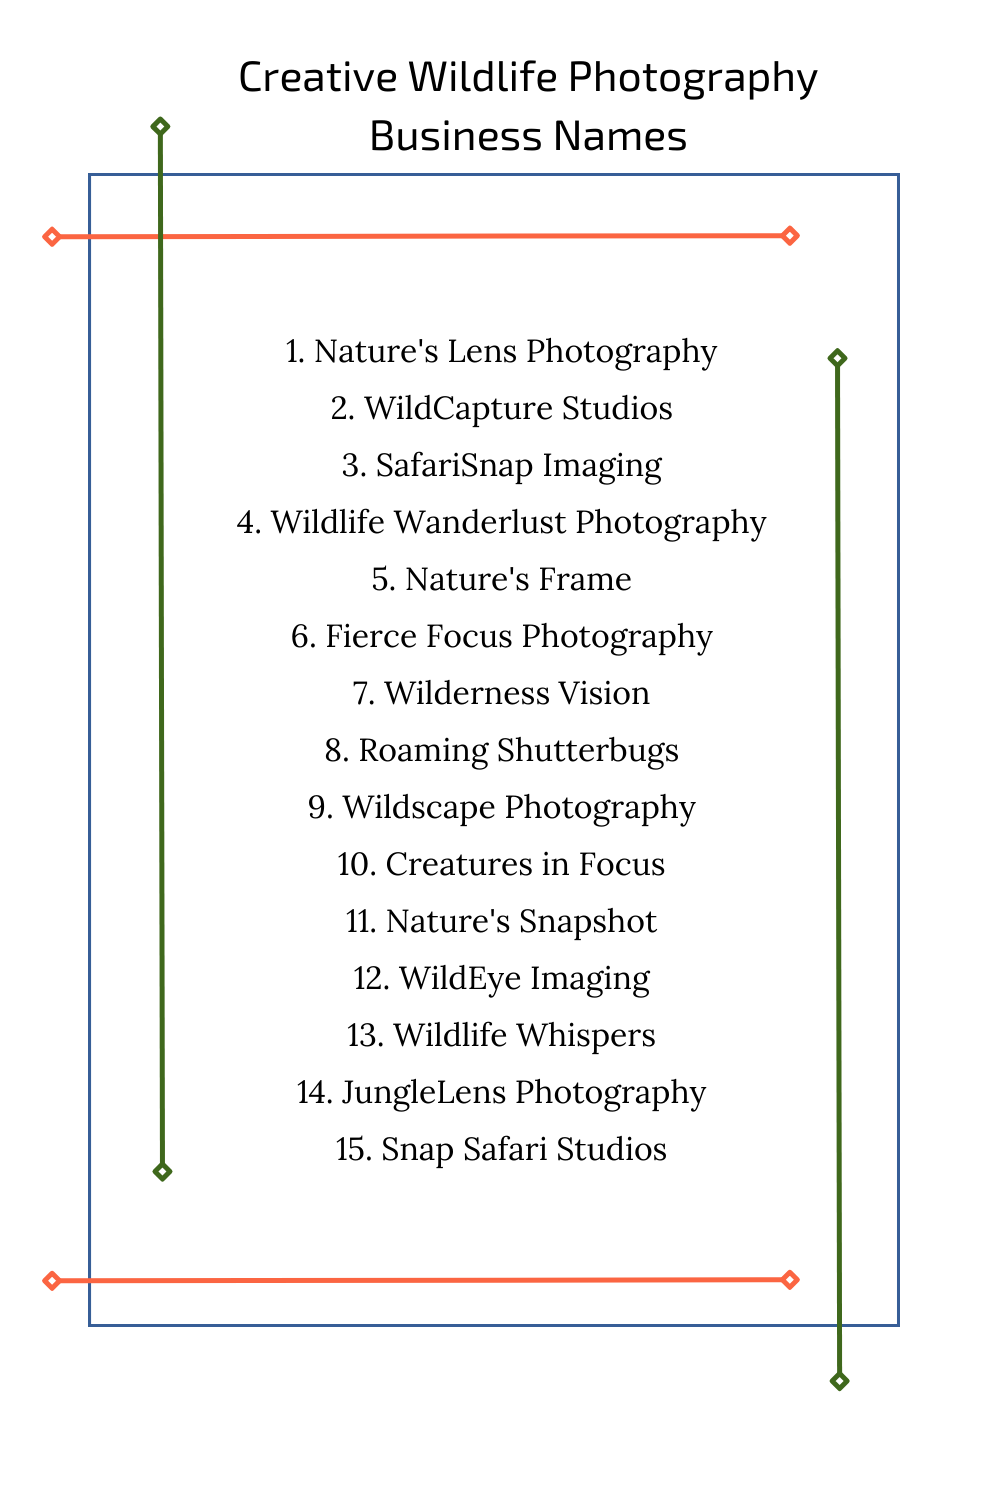 Creative Wildlife Photography Business Names